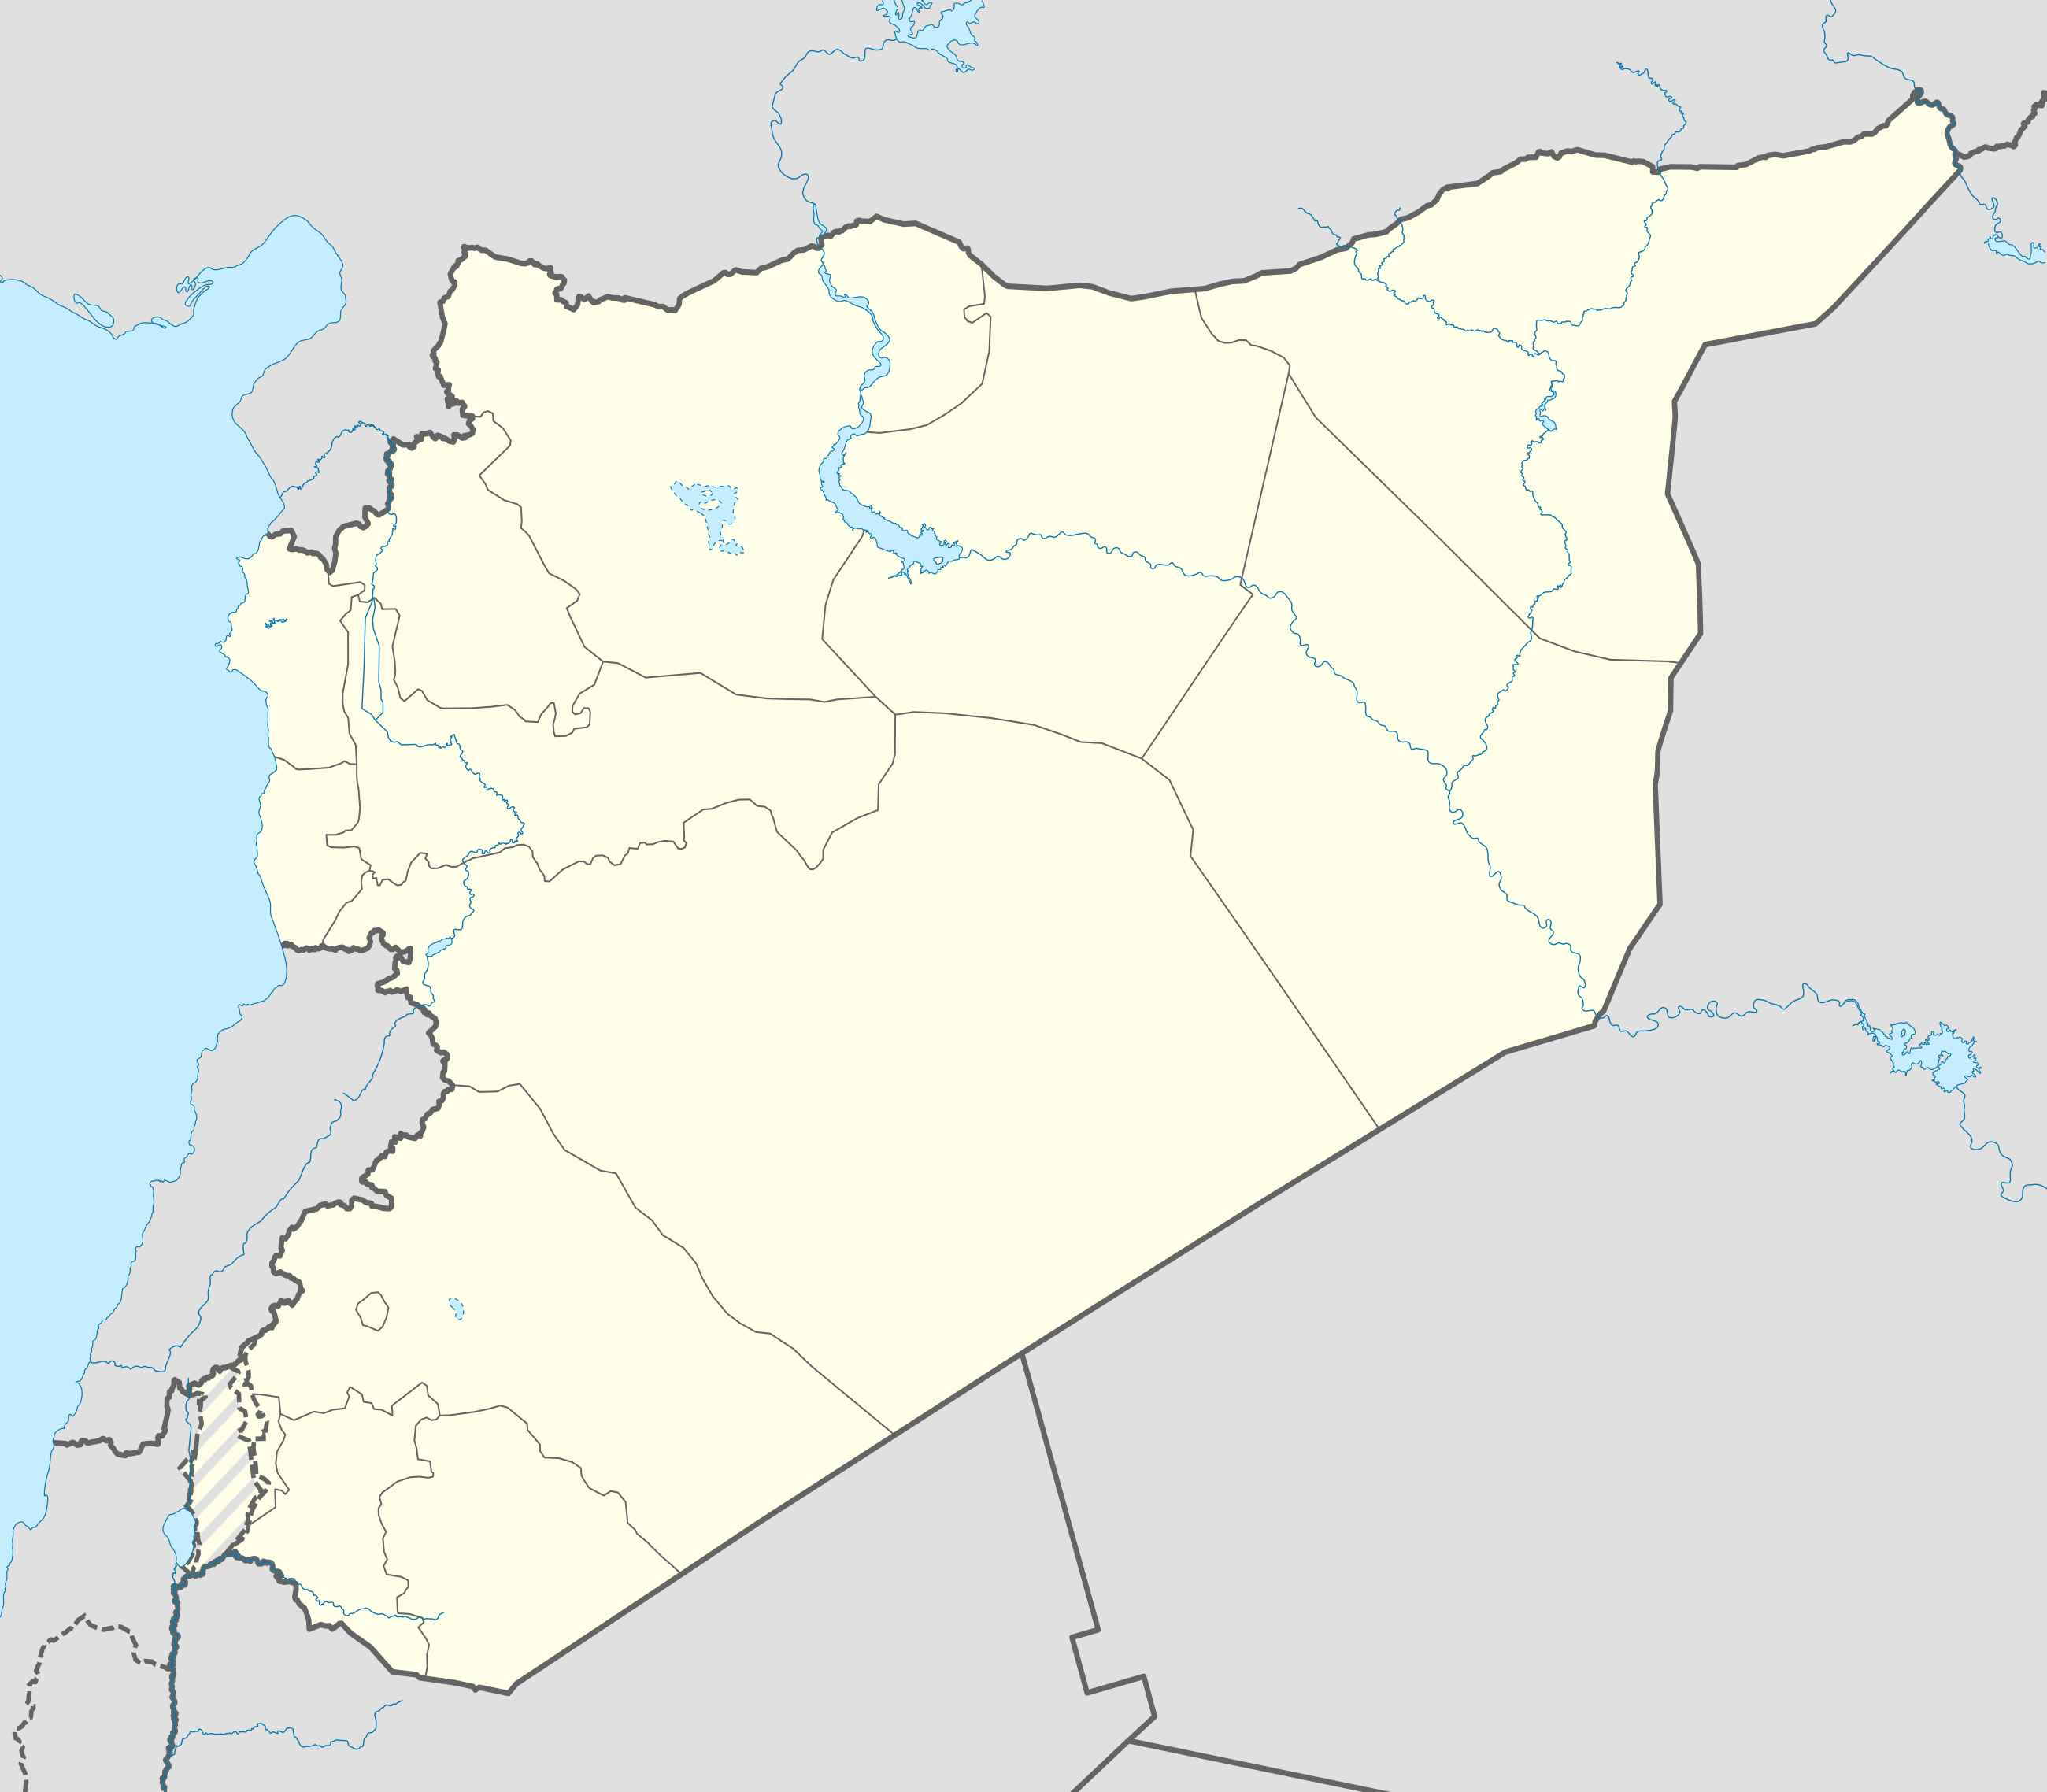 Bigles is located in Syria